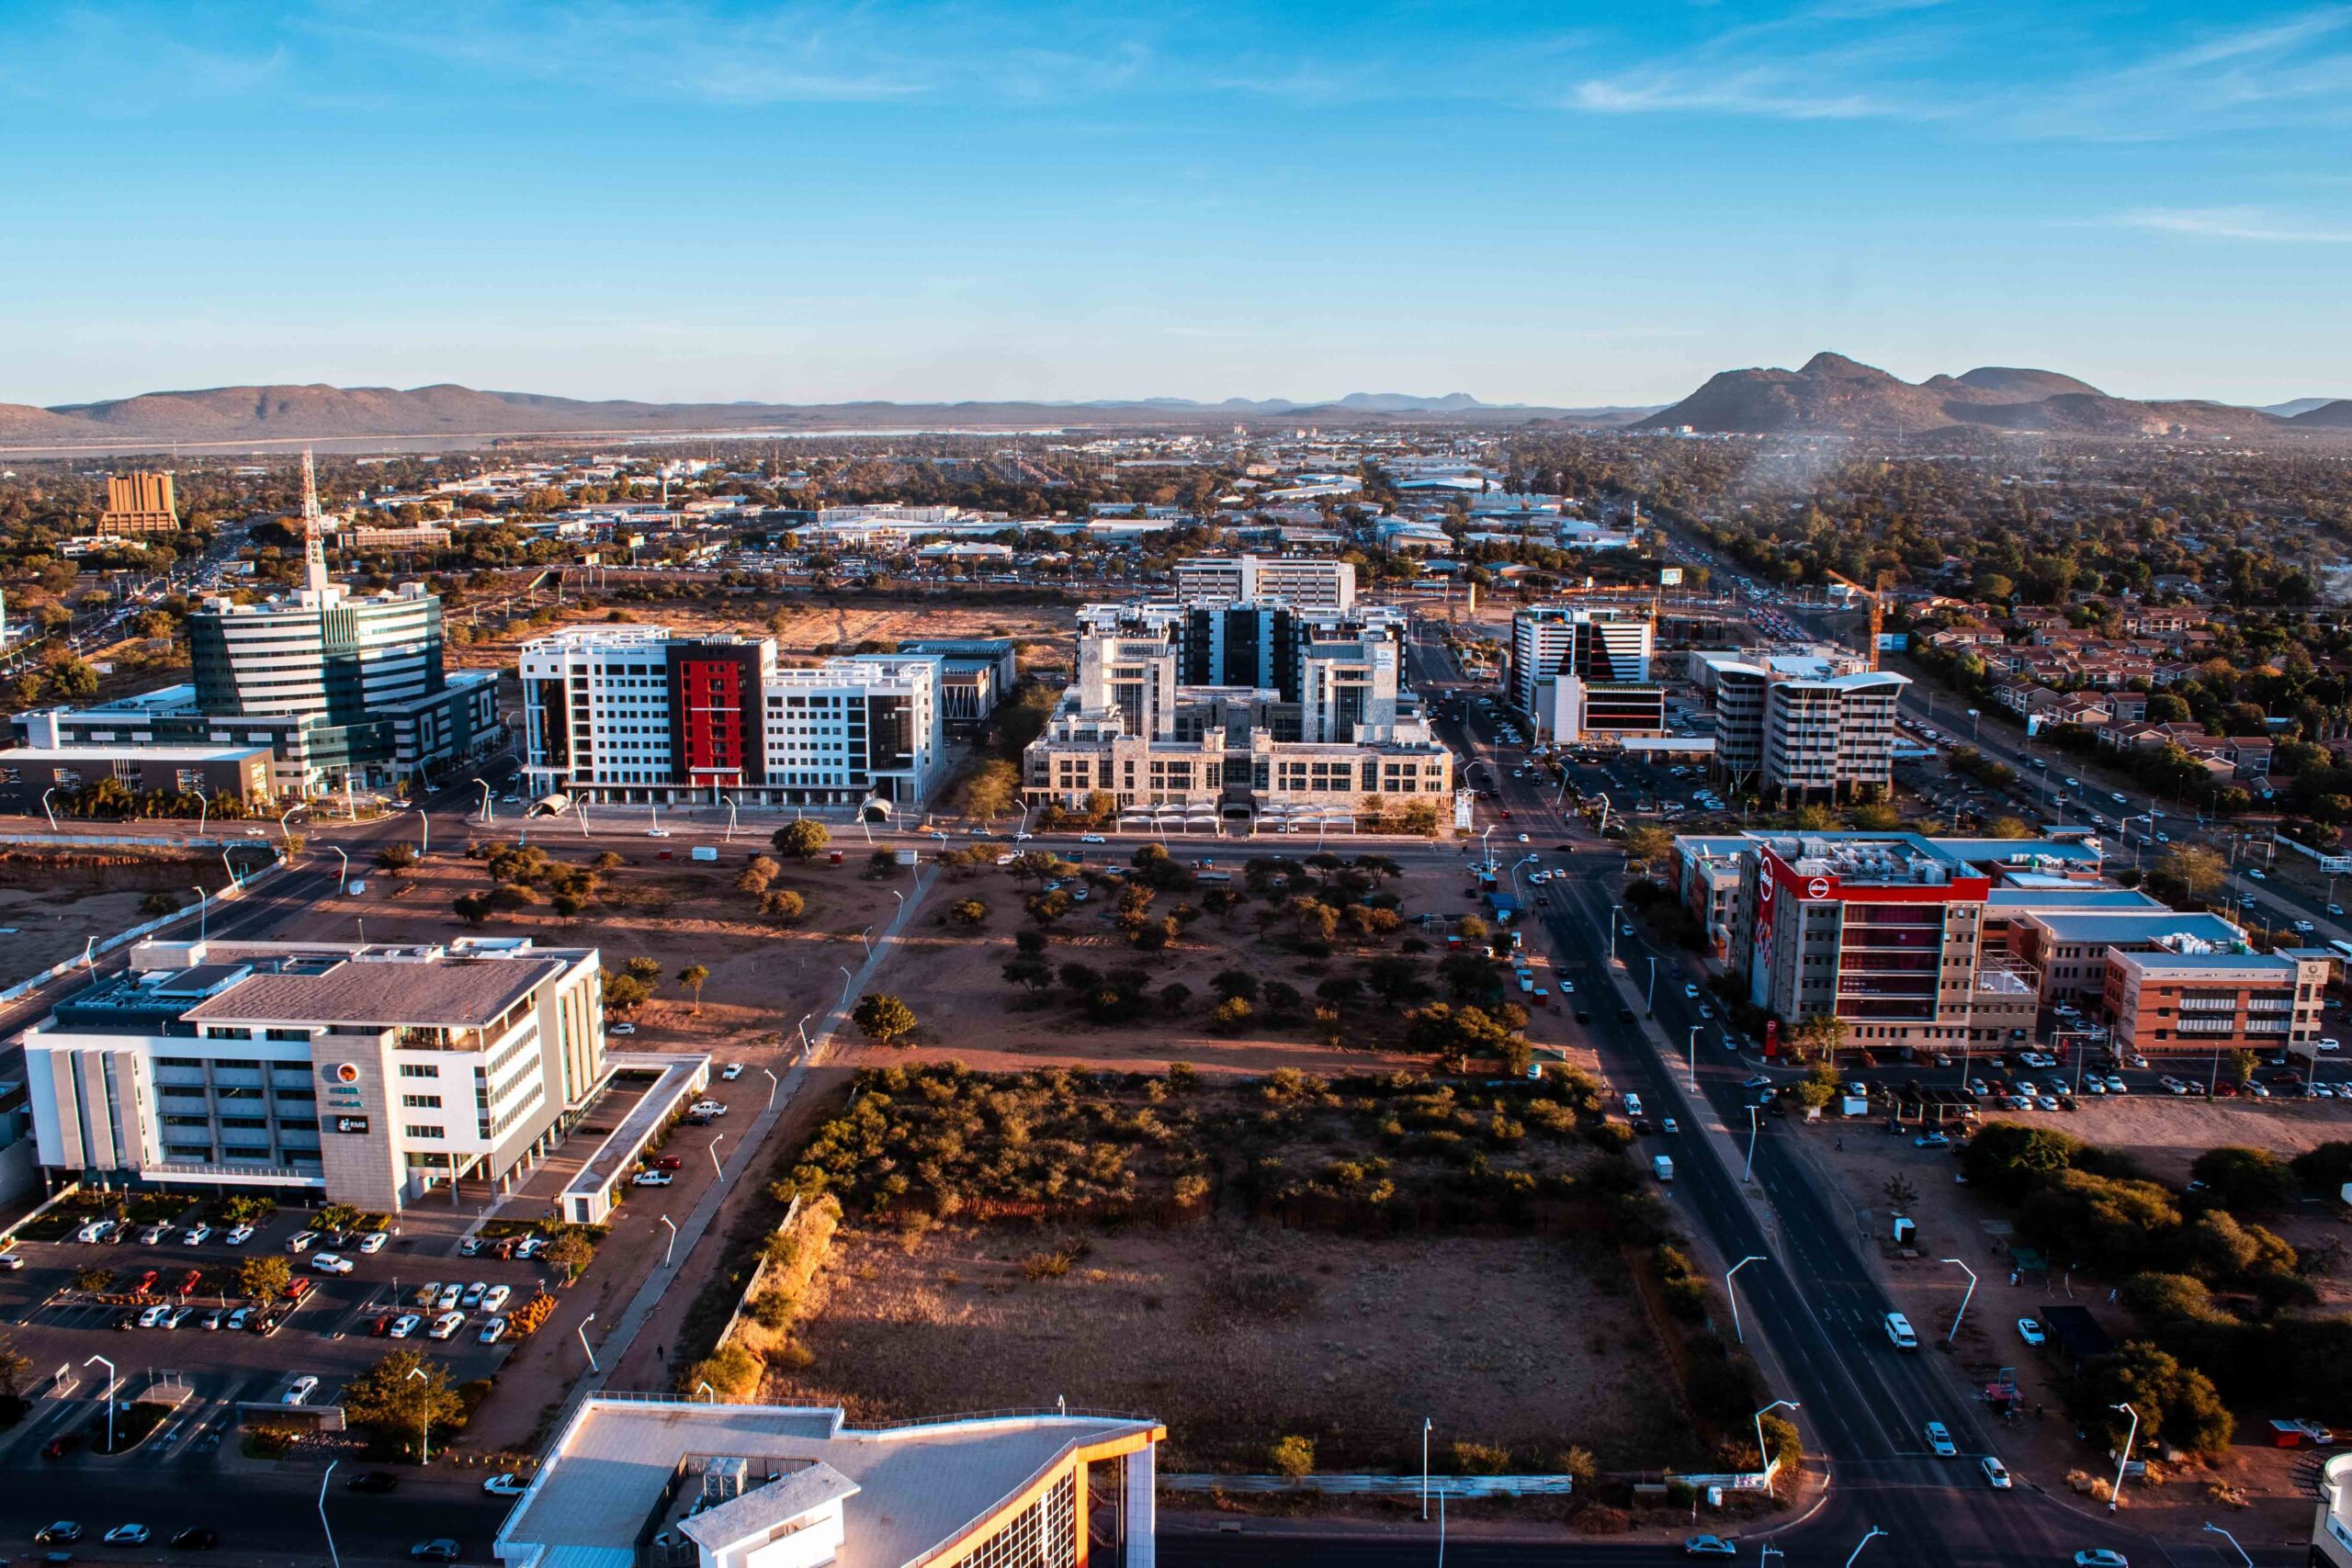 Overview of the Central Business District in Gaborone, the capital city of Botswana